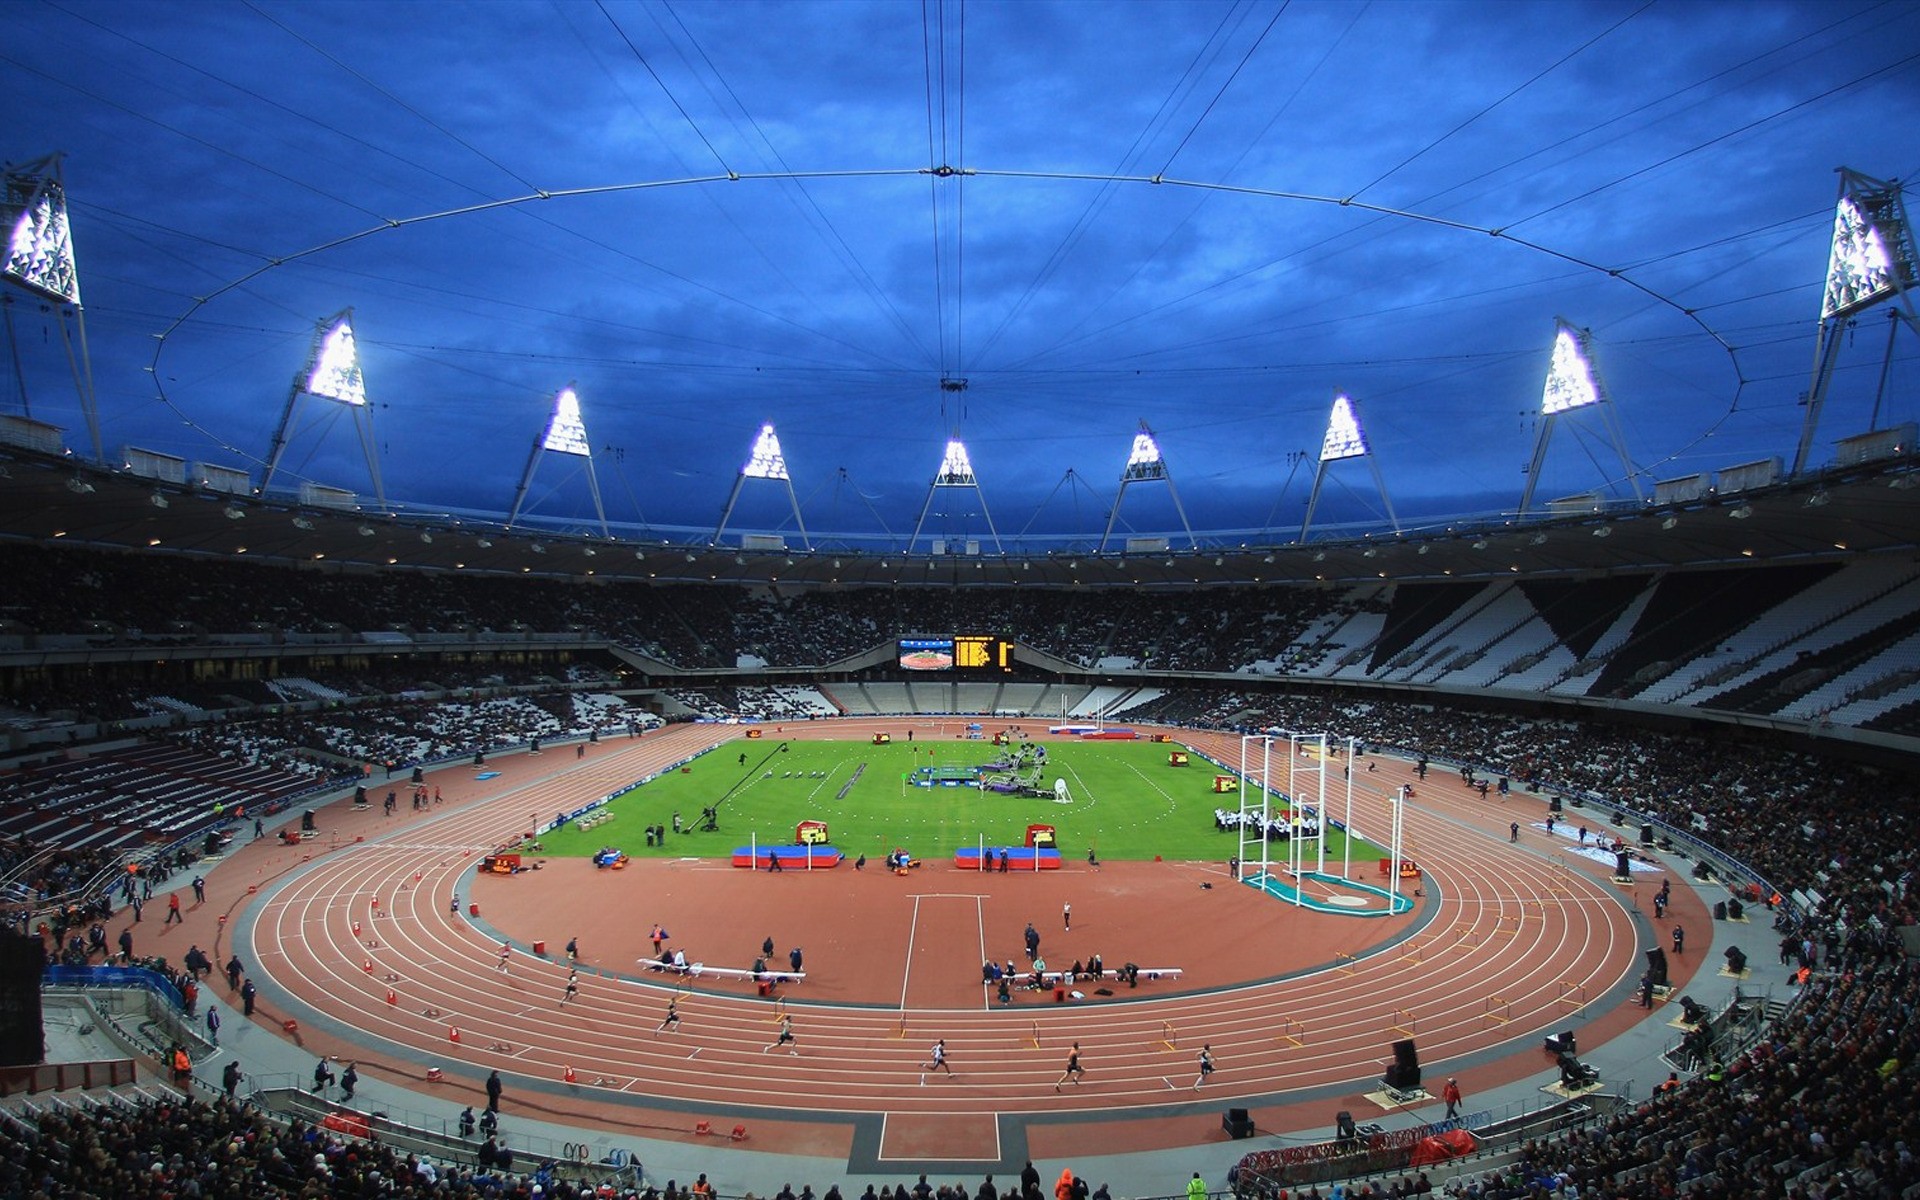 olympic games stadium competition grandstand sports fan bleachers venue baseball athlete many football crowd audience ball game soccer spectator sport group championship field london athelete olympics